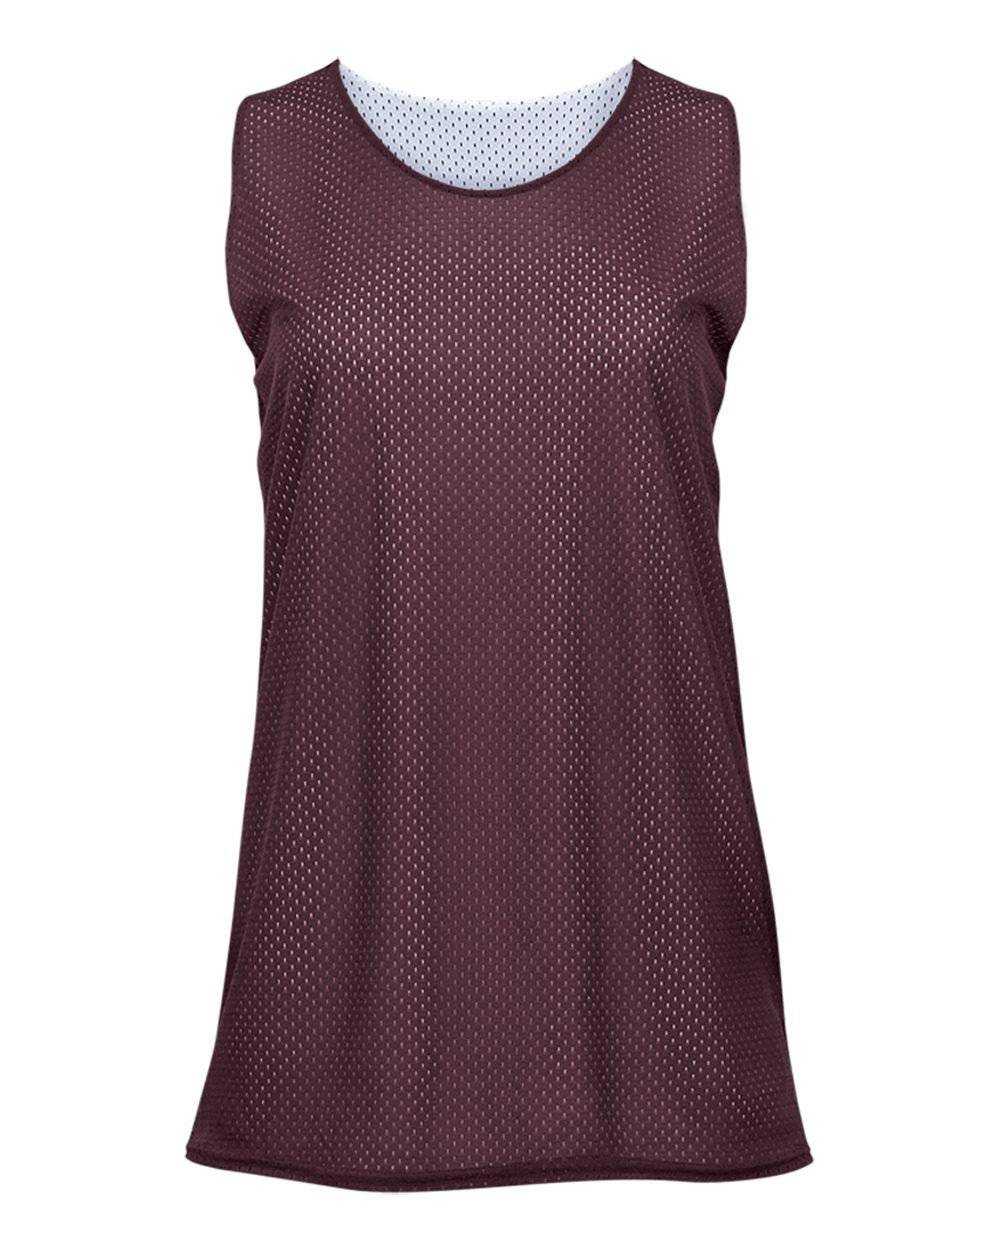 Badger Sport 8978 Ladies Reversible Tank - Maroon White - HIT a Double - 1